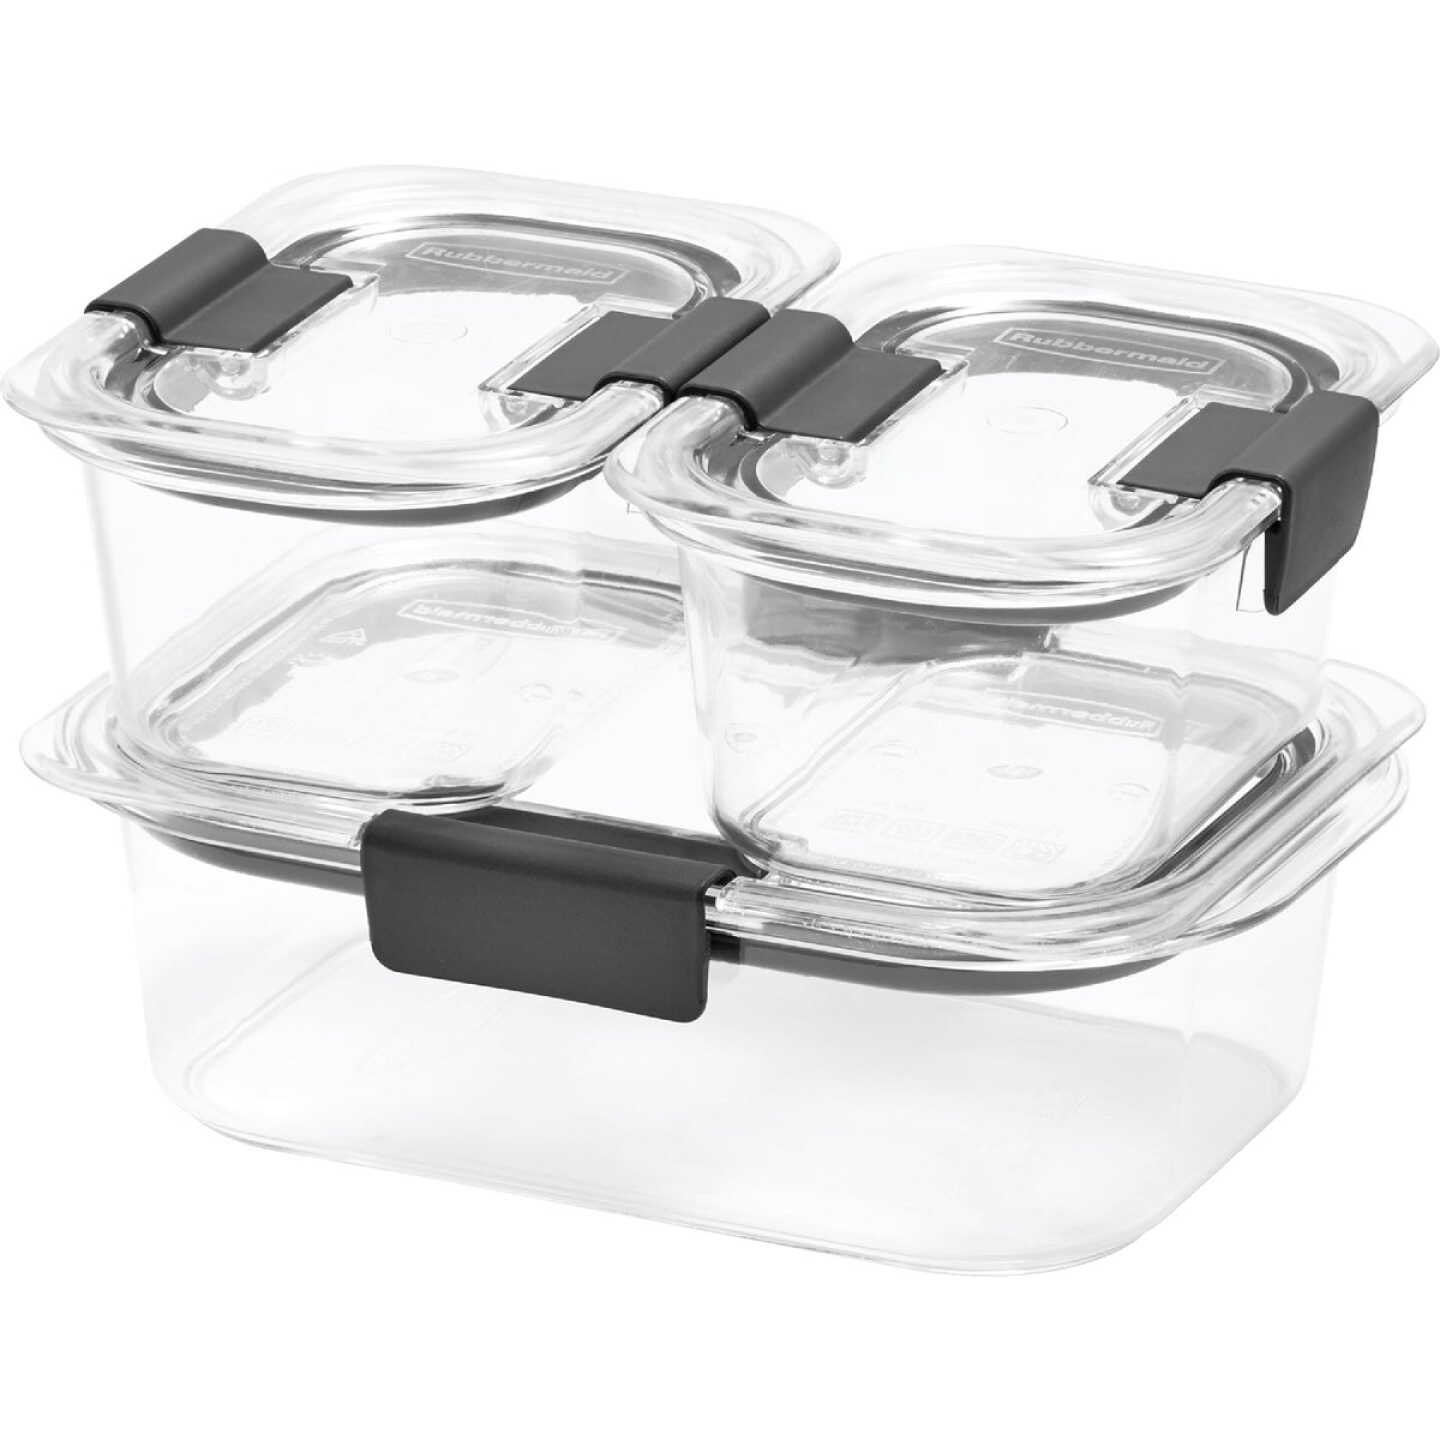 Rubbermaid 6pc Brilliance Glass Food Storage Containers, 4.7 Cup